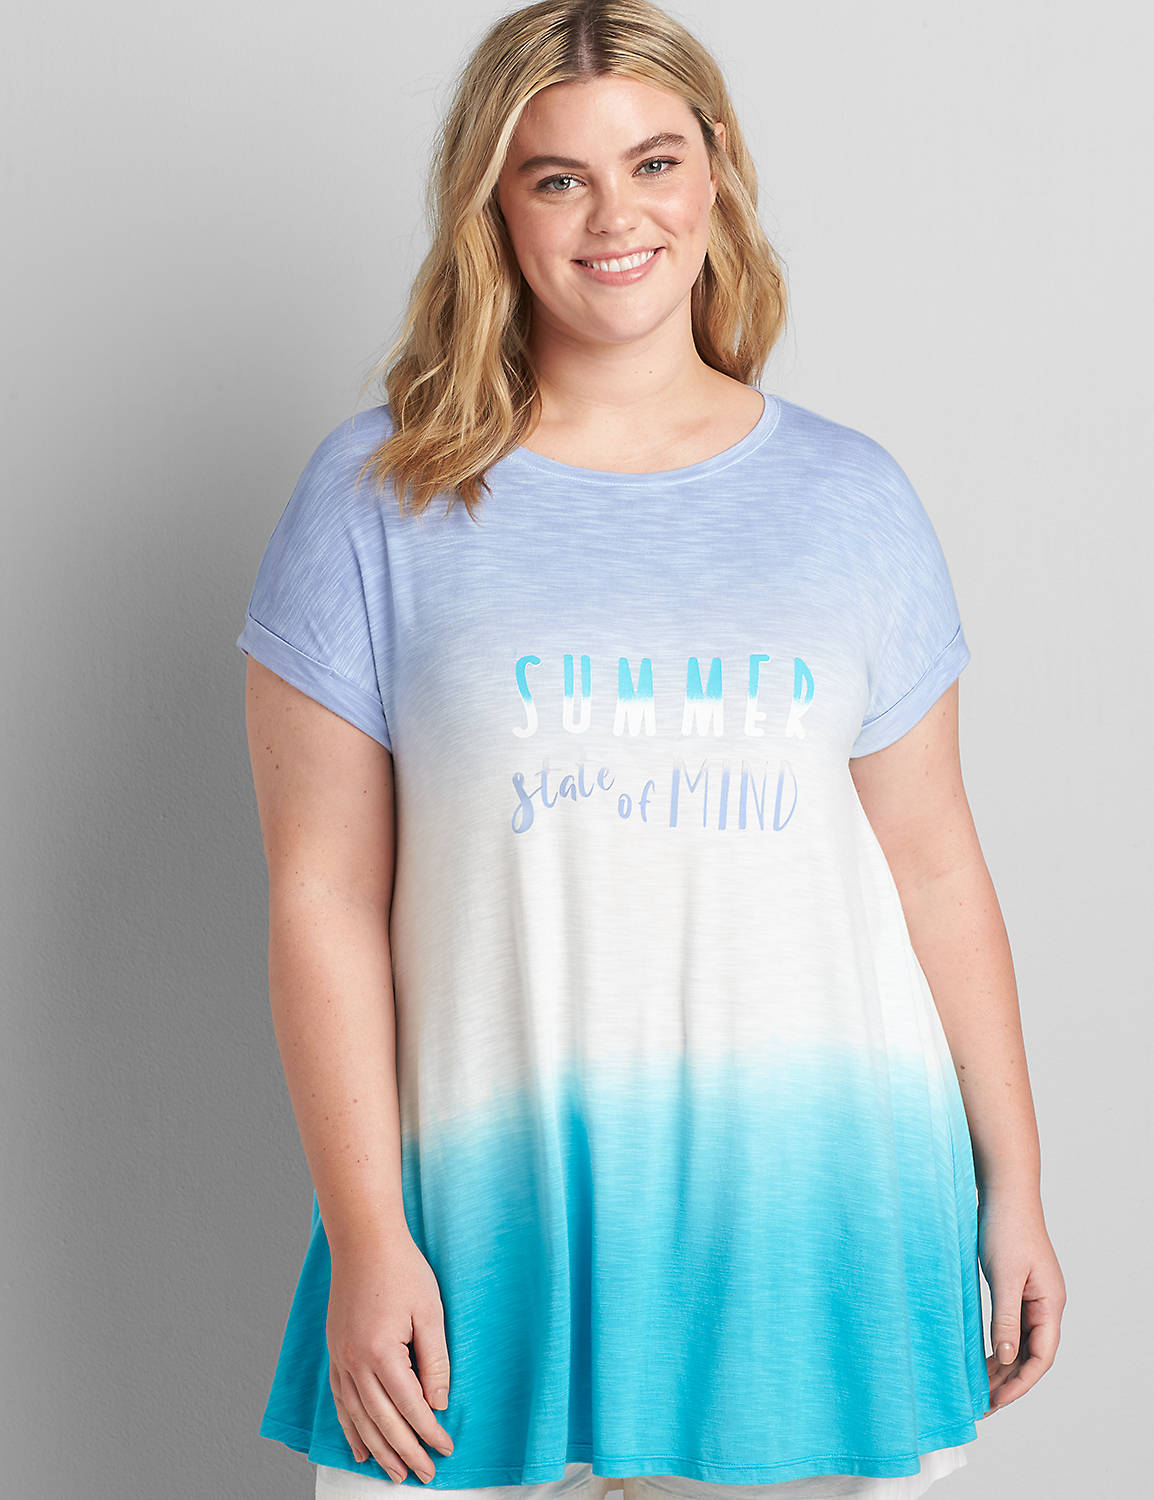 Summer State of Mind Graphic Tunic Top Product Image 1